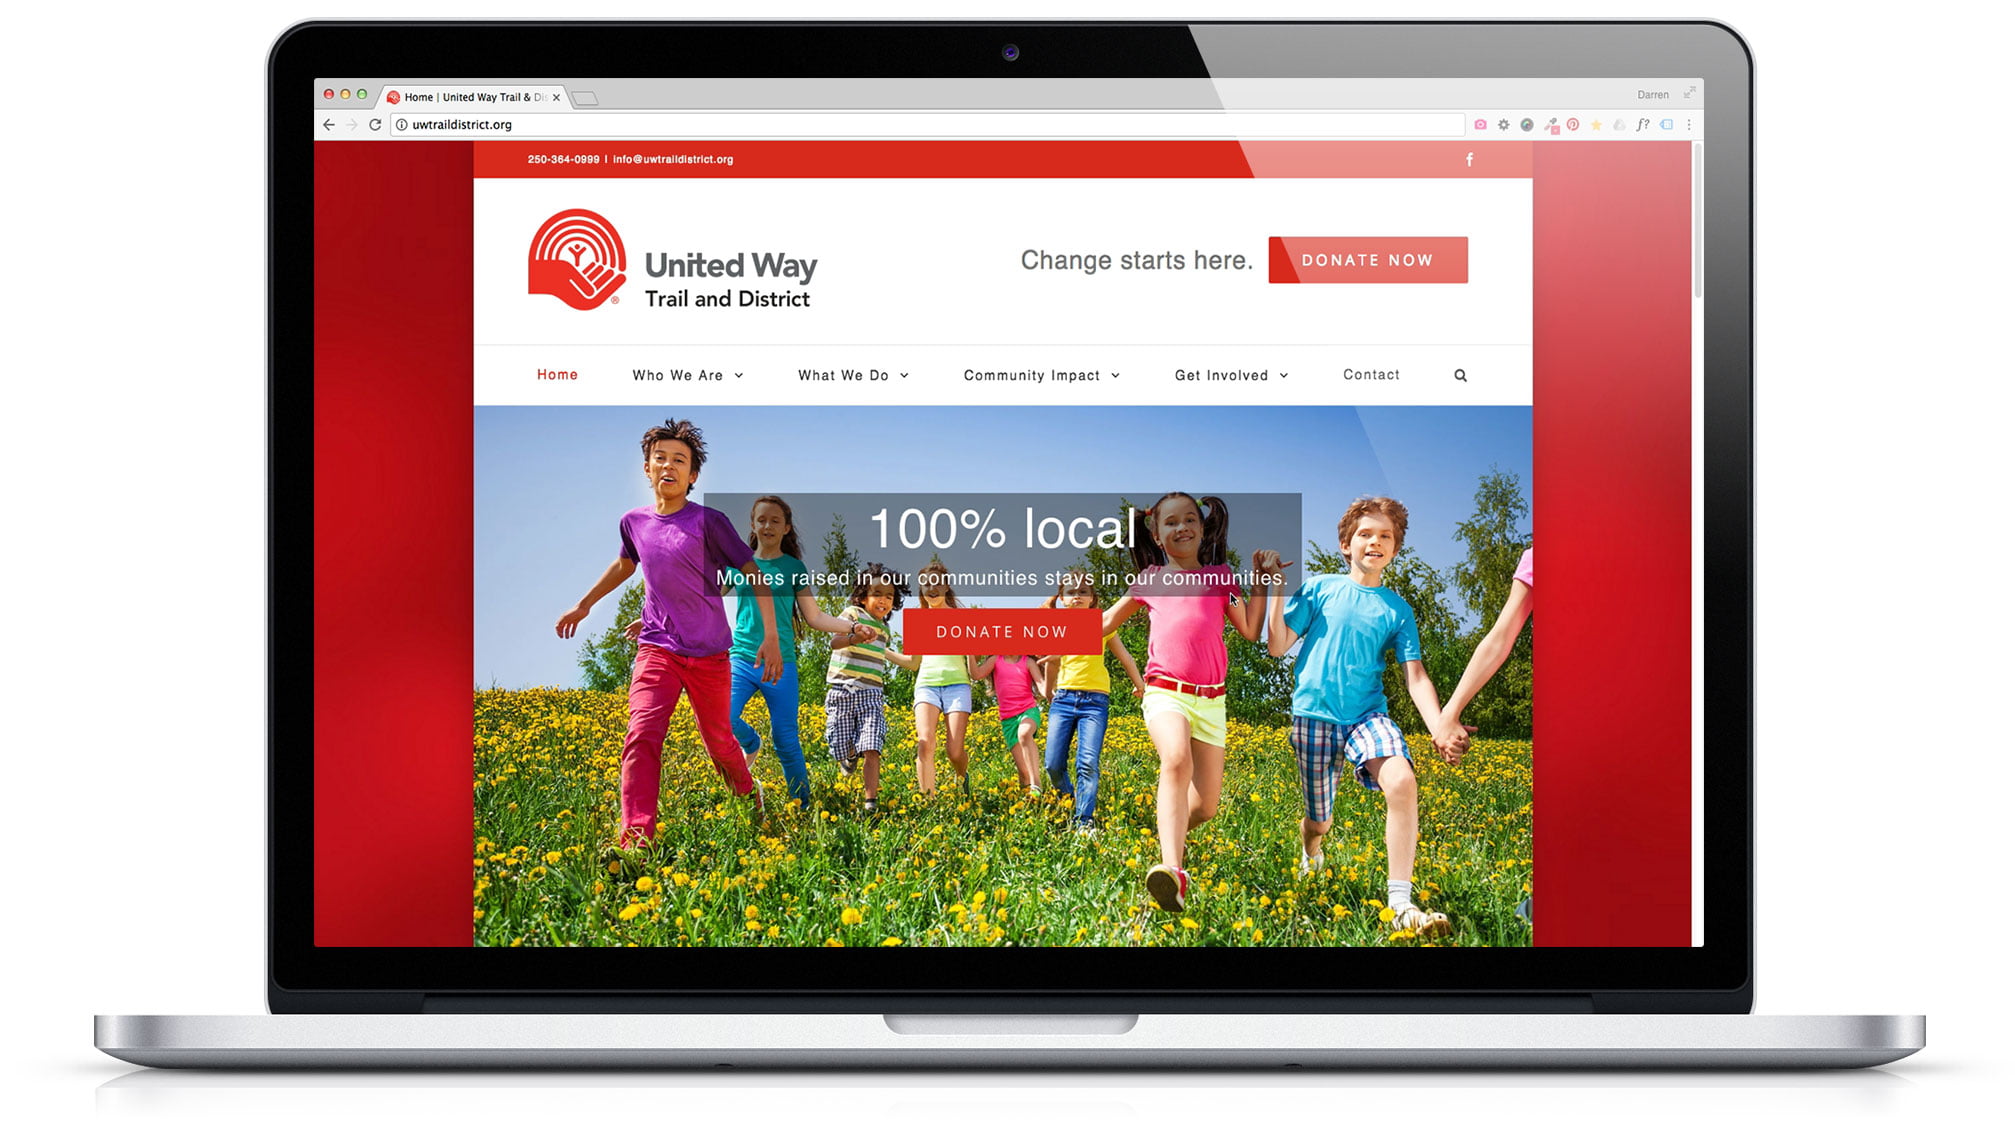 We provided The United Way of Trail & District in Trail BC, the Kootenays with mobile responsive web design